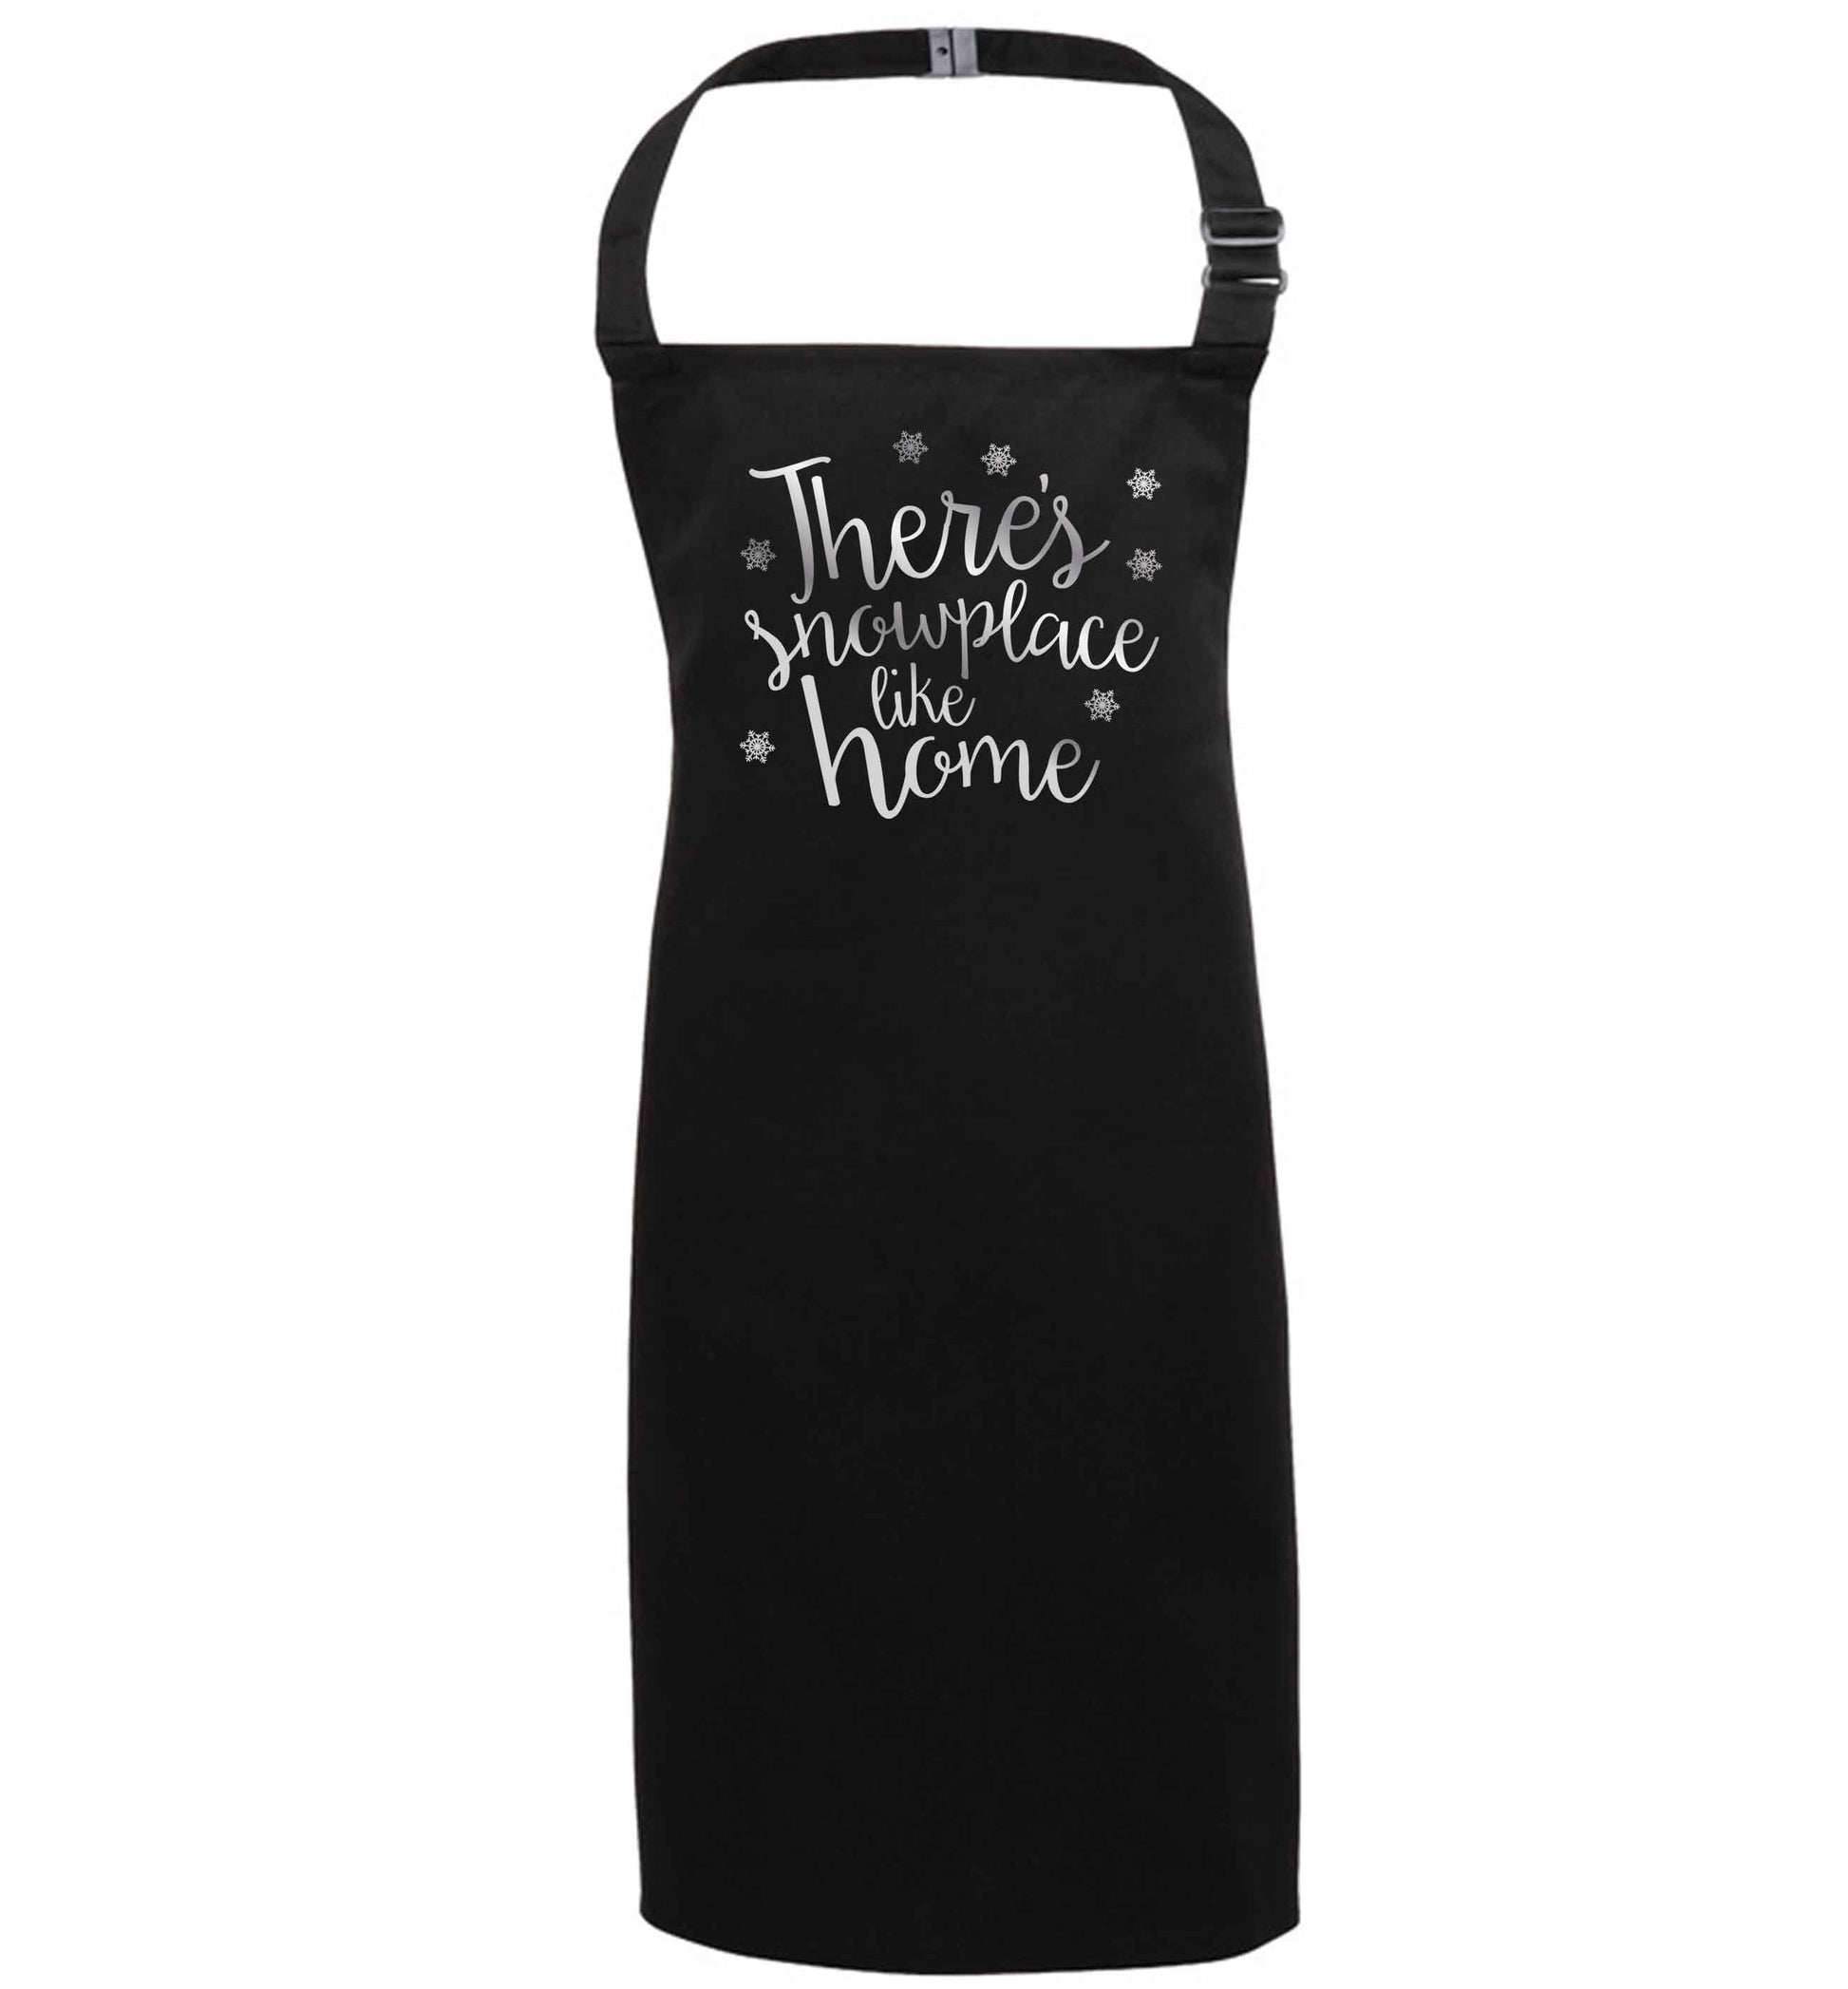 There's snowplace like home - metallic silver black apron 7-10 years